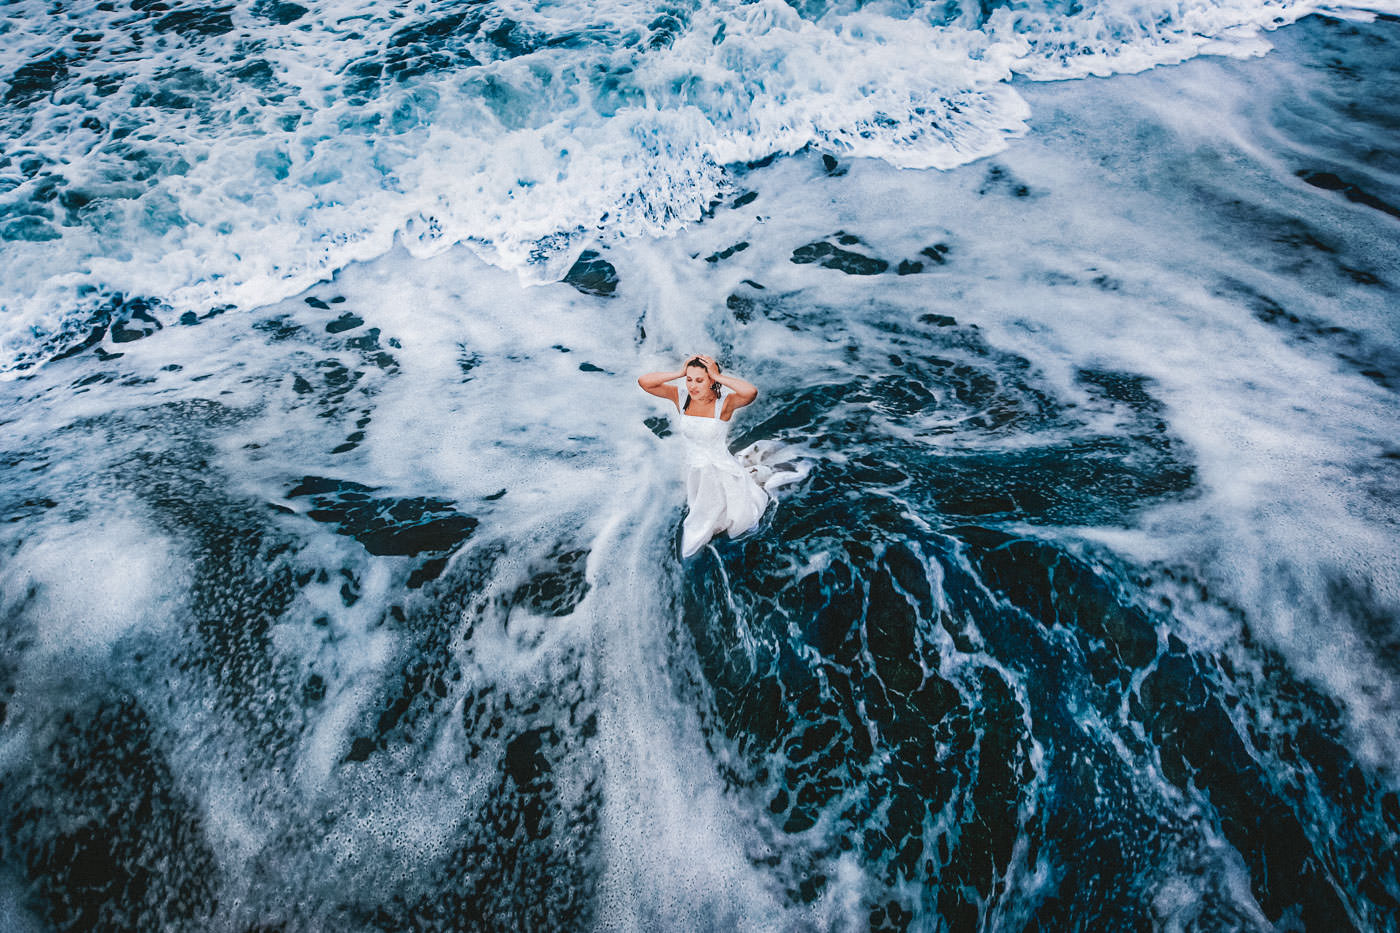 Bride in wedding dress standing in the waves of the Atlantic, birds-eye-view showing wonderful patterns in the water, After-Wedding-Session at Slea Head, Dingle, Co. Kerry, Ireland